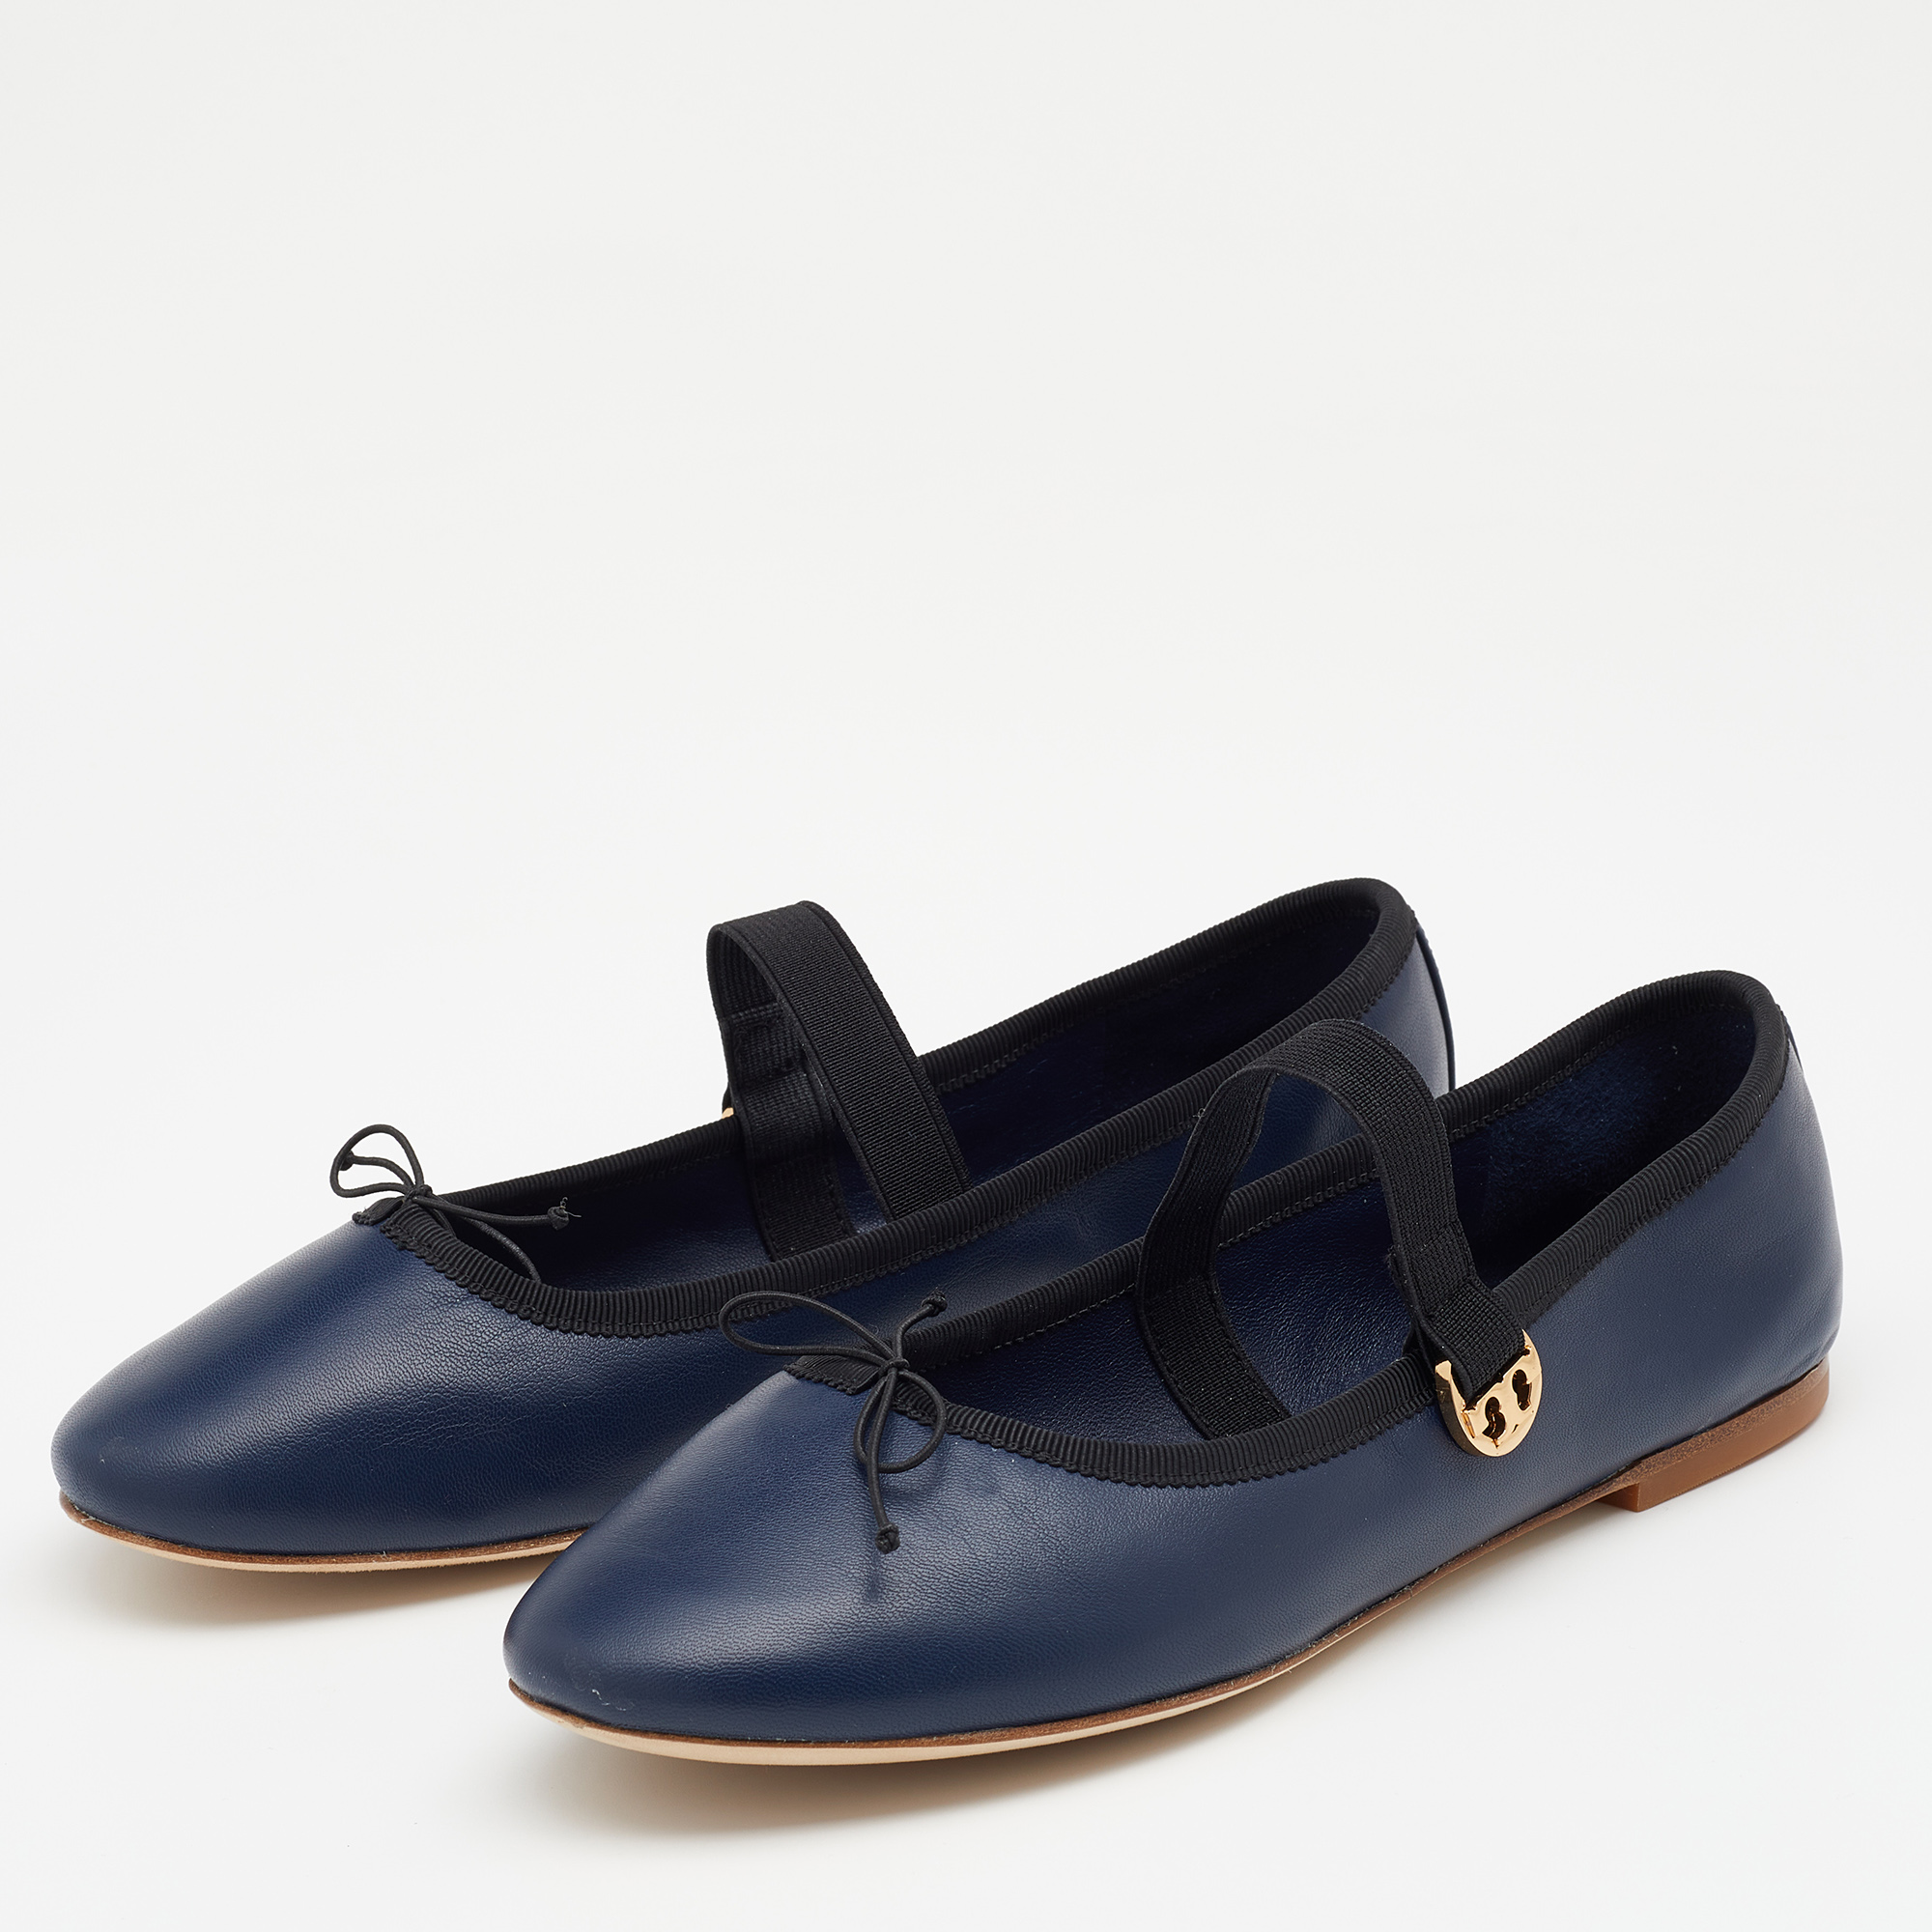 

Tory Burch Navy Blue/Black Leather Mary Jane Ballet Flats Size